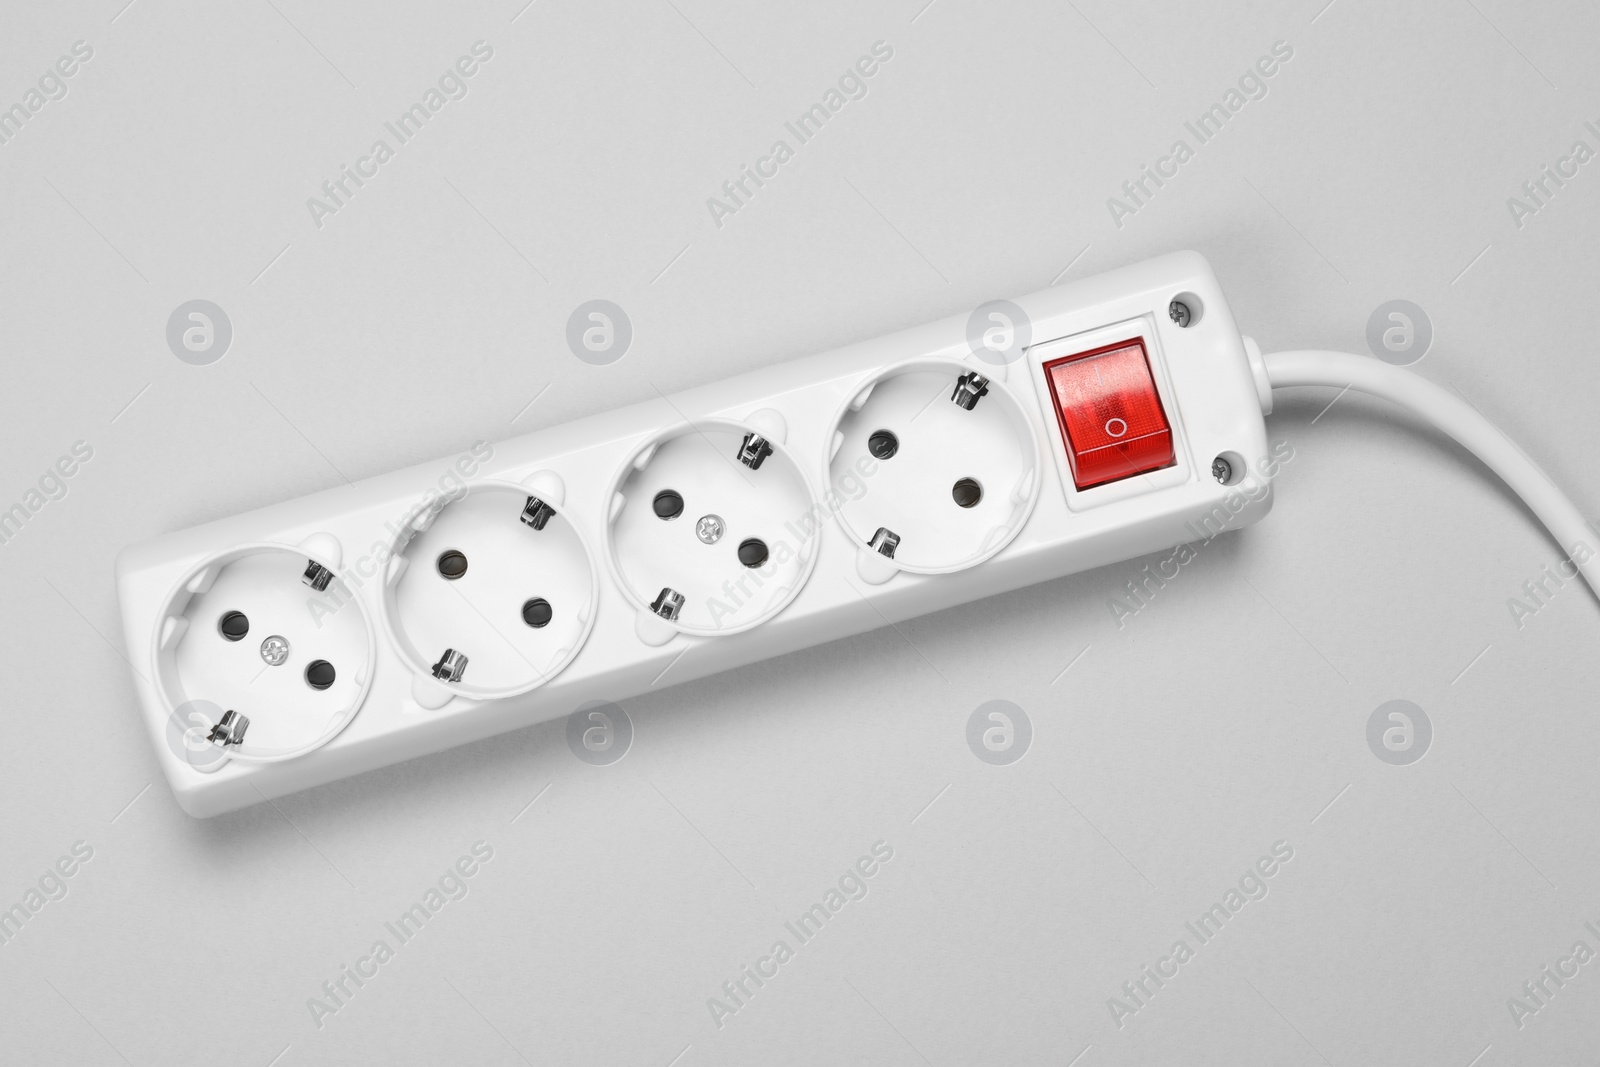 Photo of Power strip with switch button on white background, top view